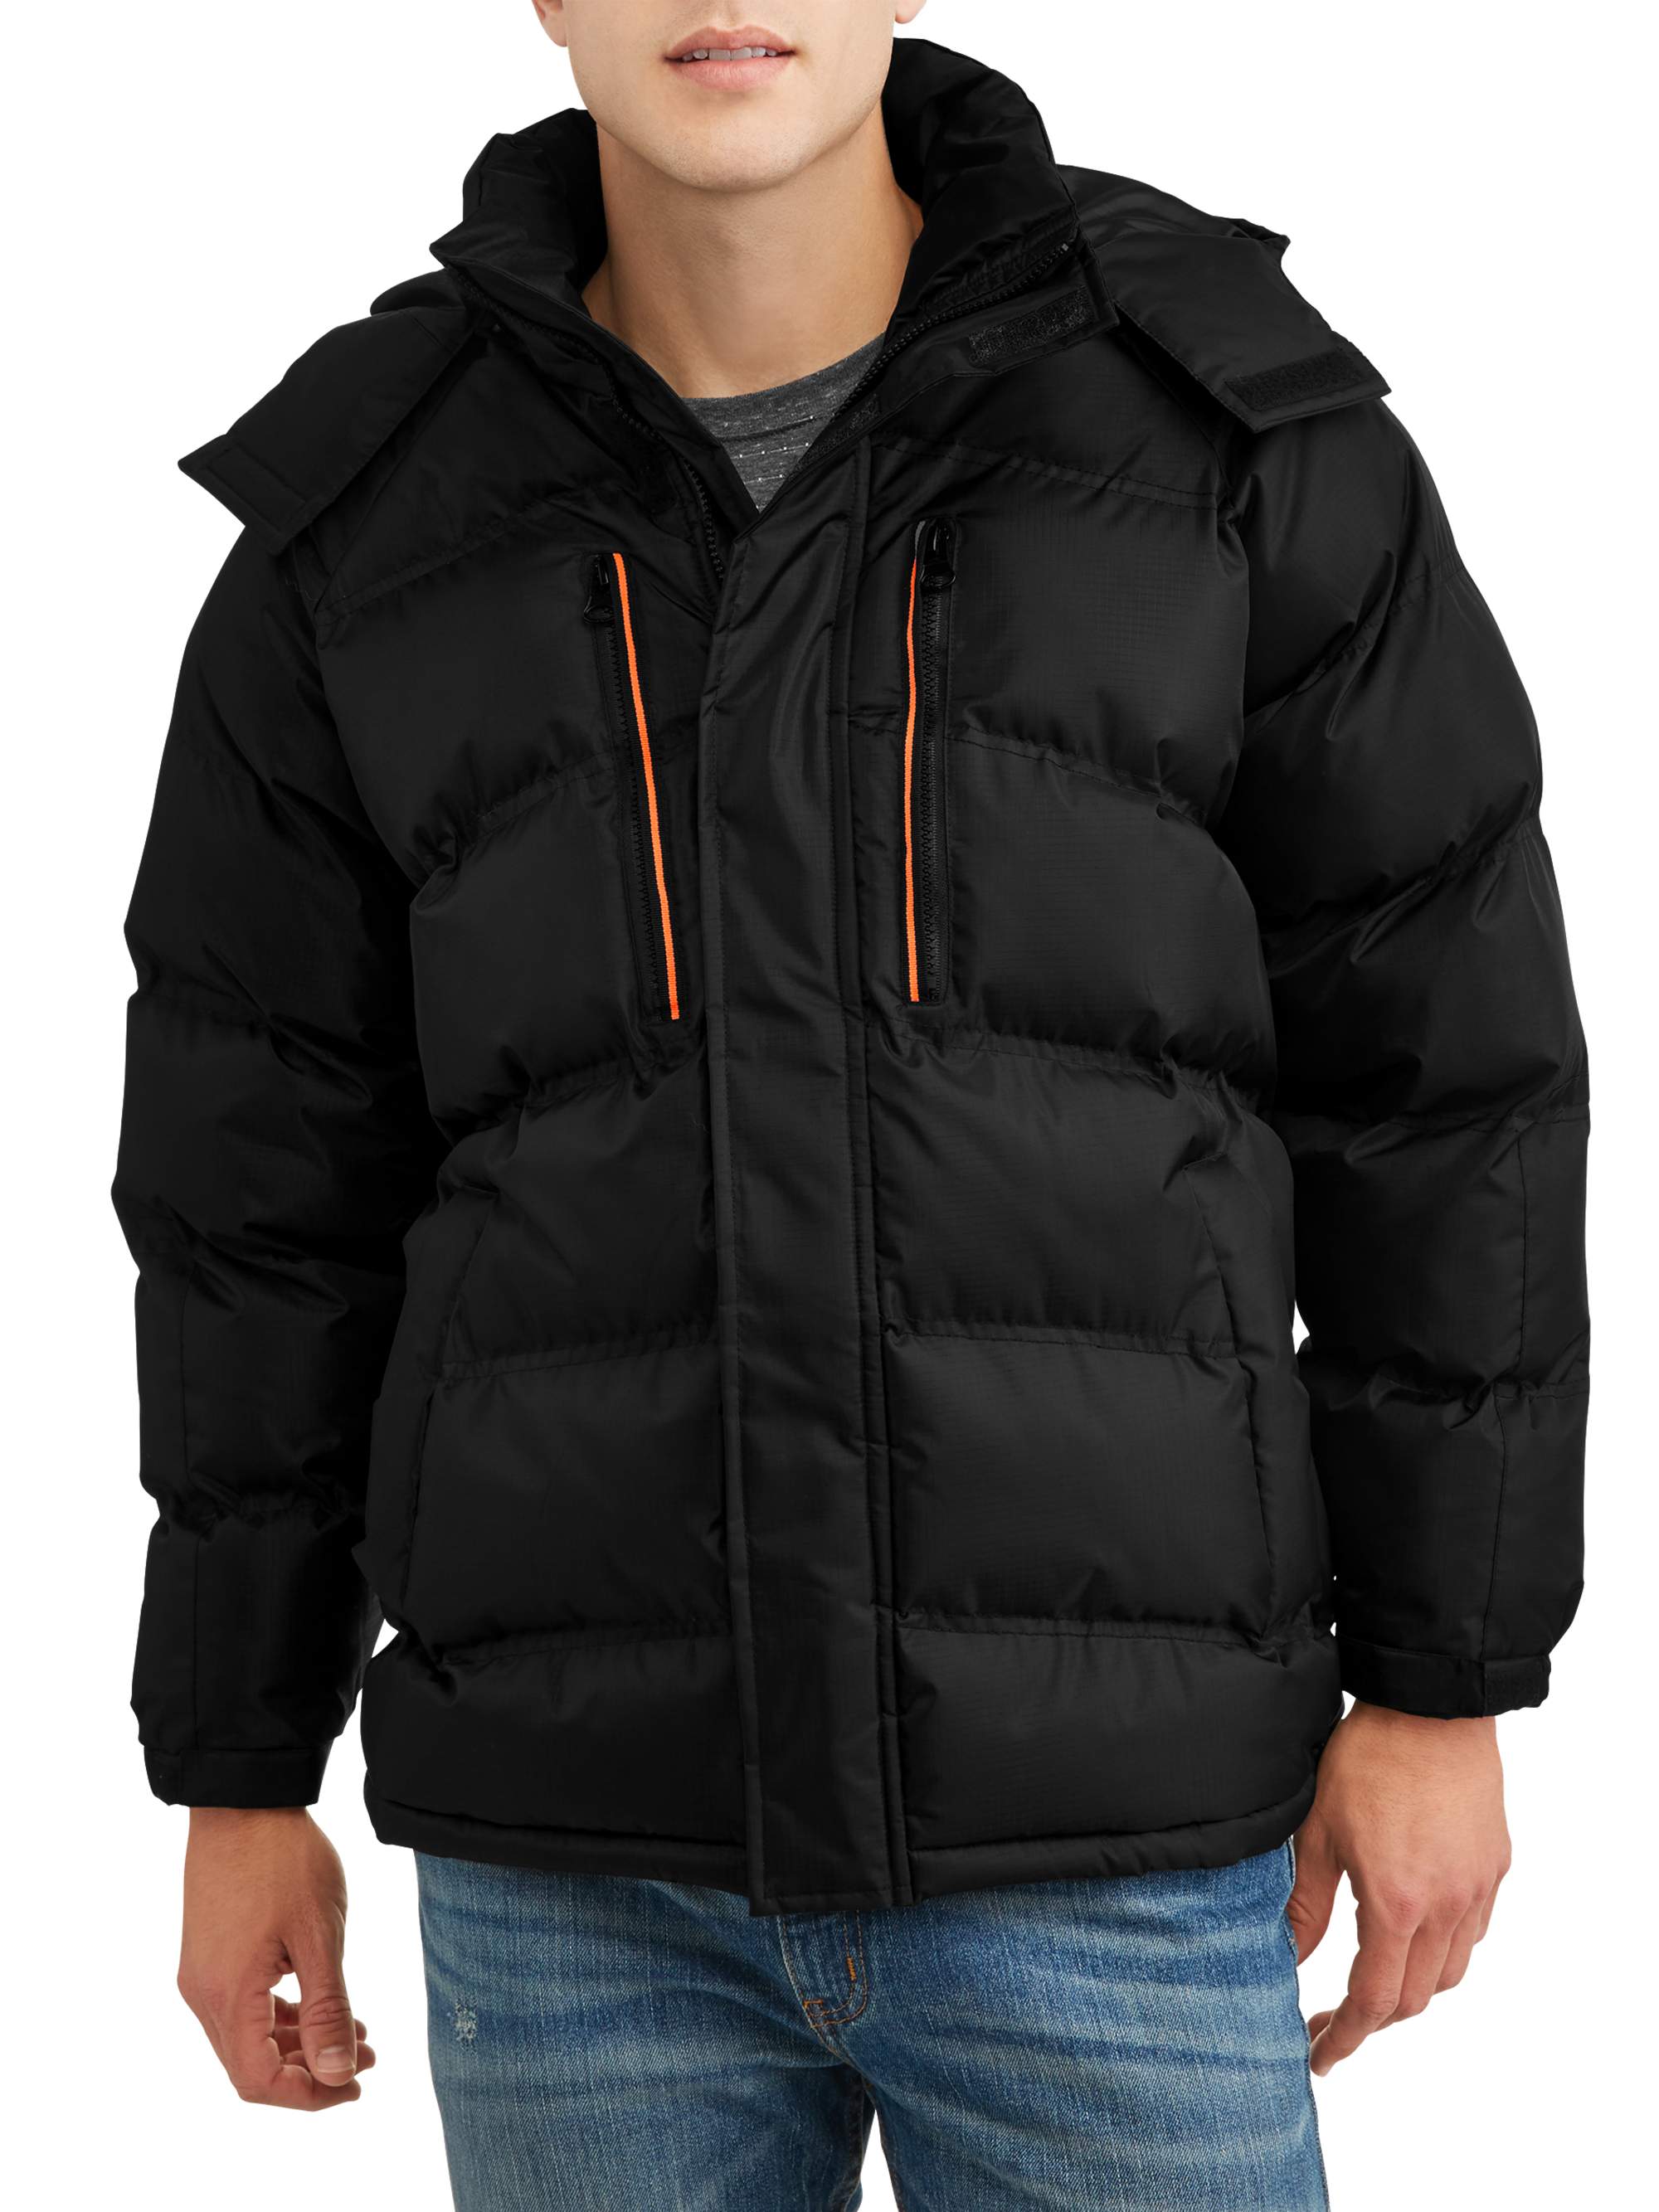 Climate Concepts Men's Full Zip Hooded Rip Stop Midweight Jacket - image 1 of 4